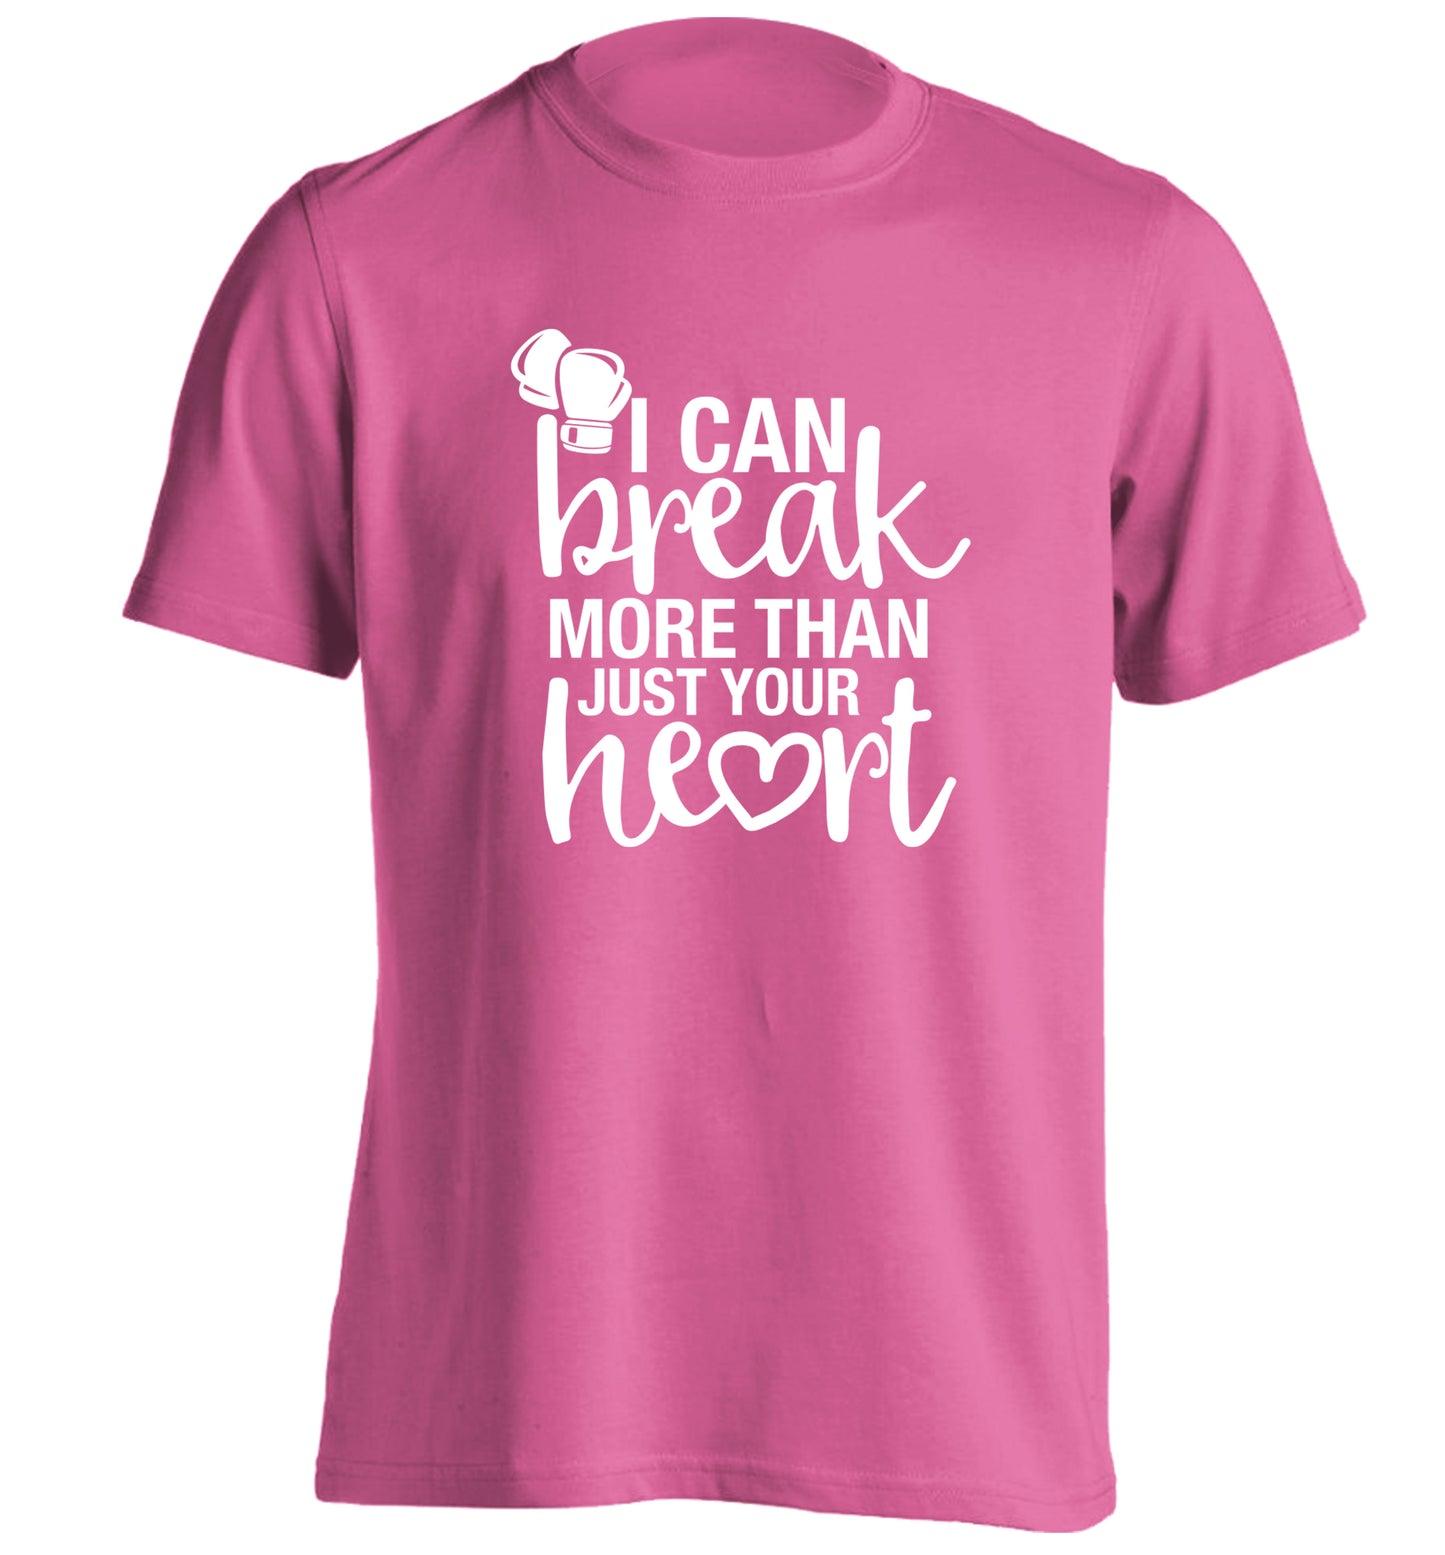 I can break more than just your heart adults unisex pink Tshirt 2XL